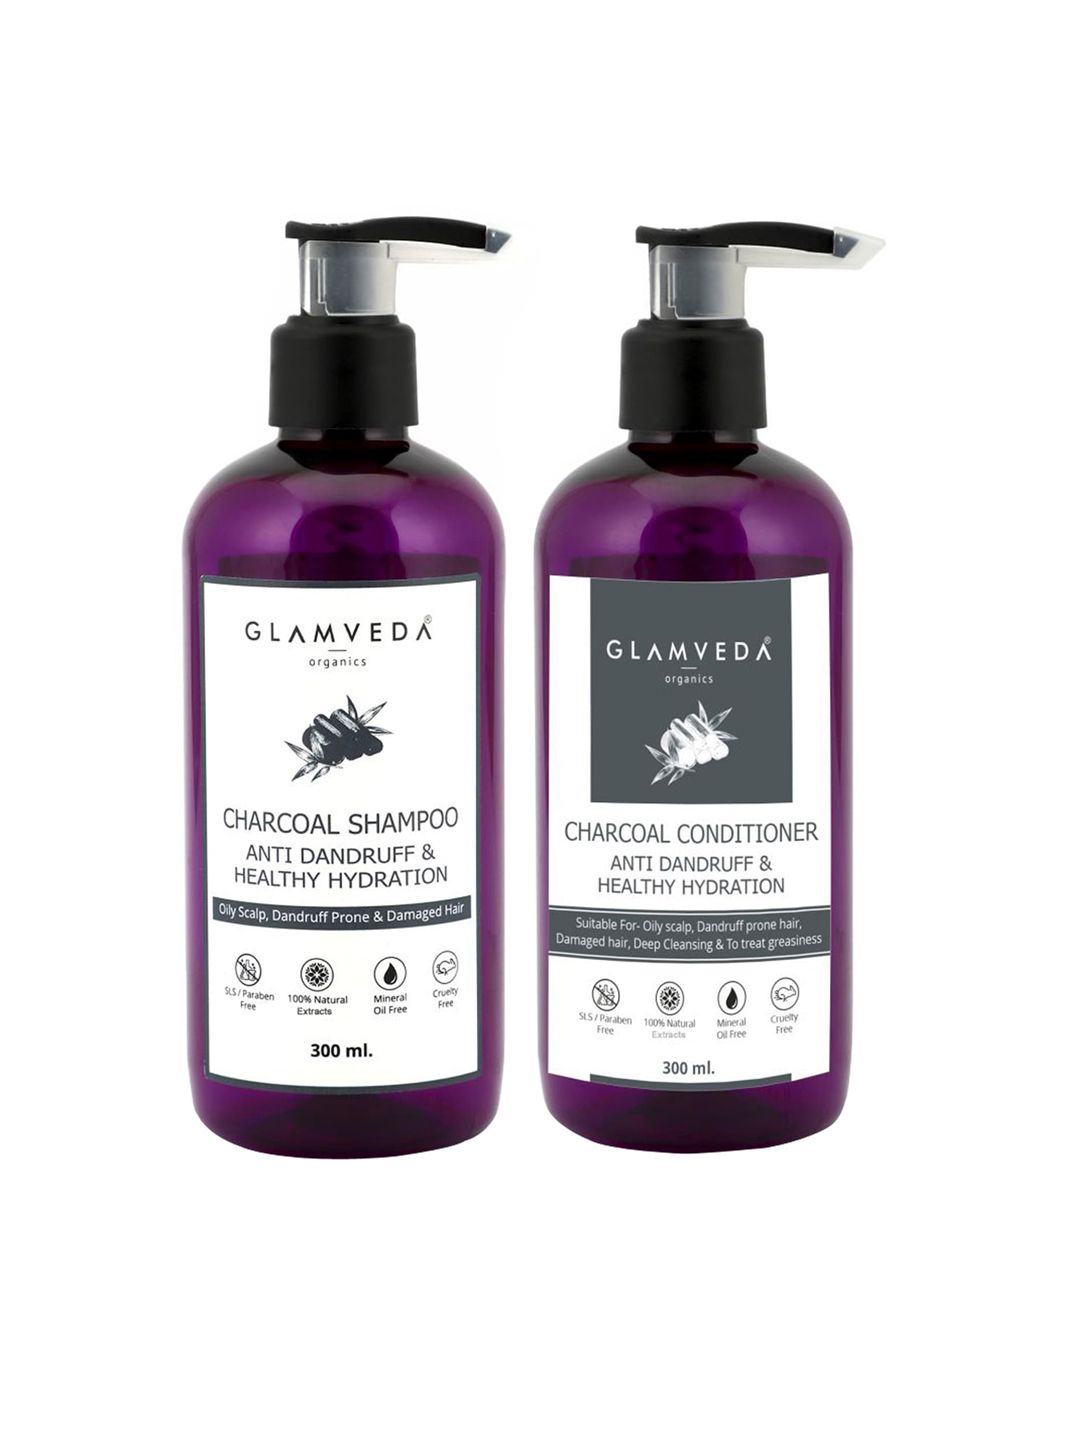 Glamveda Charcoal Shampoo & Conditioner For Anti Dandruff & Healthy Hydration-300ml Each Price in India